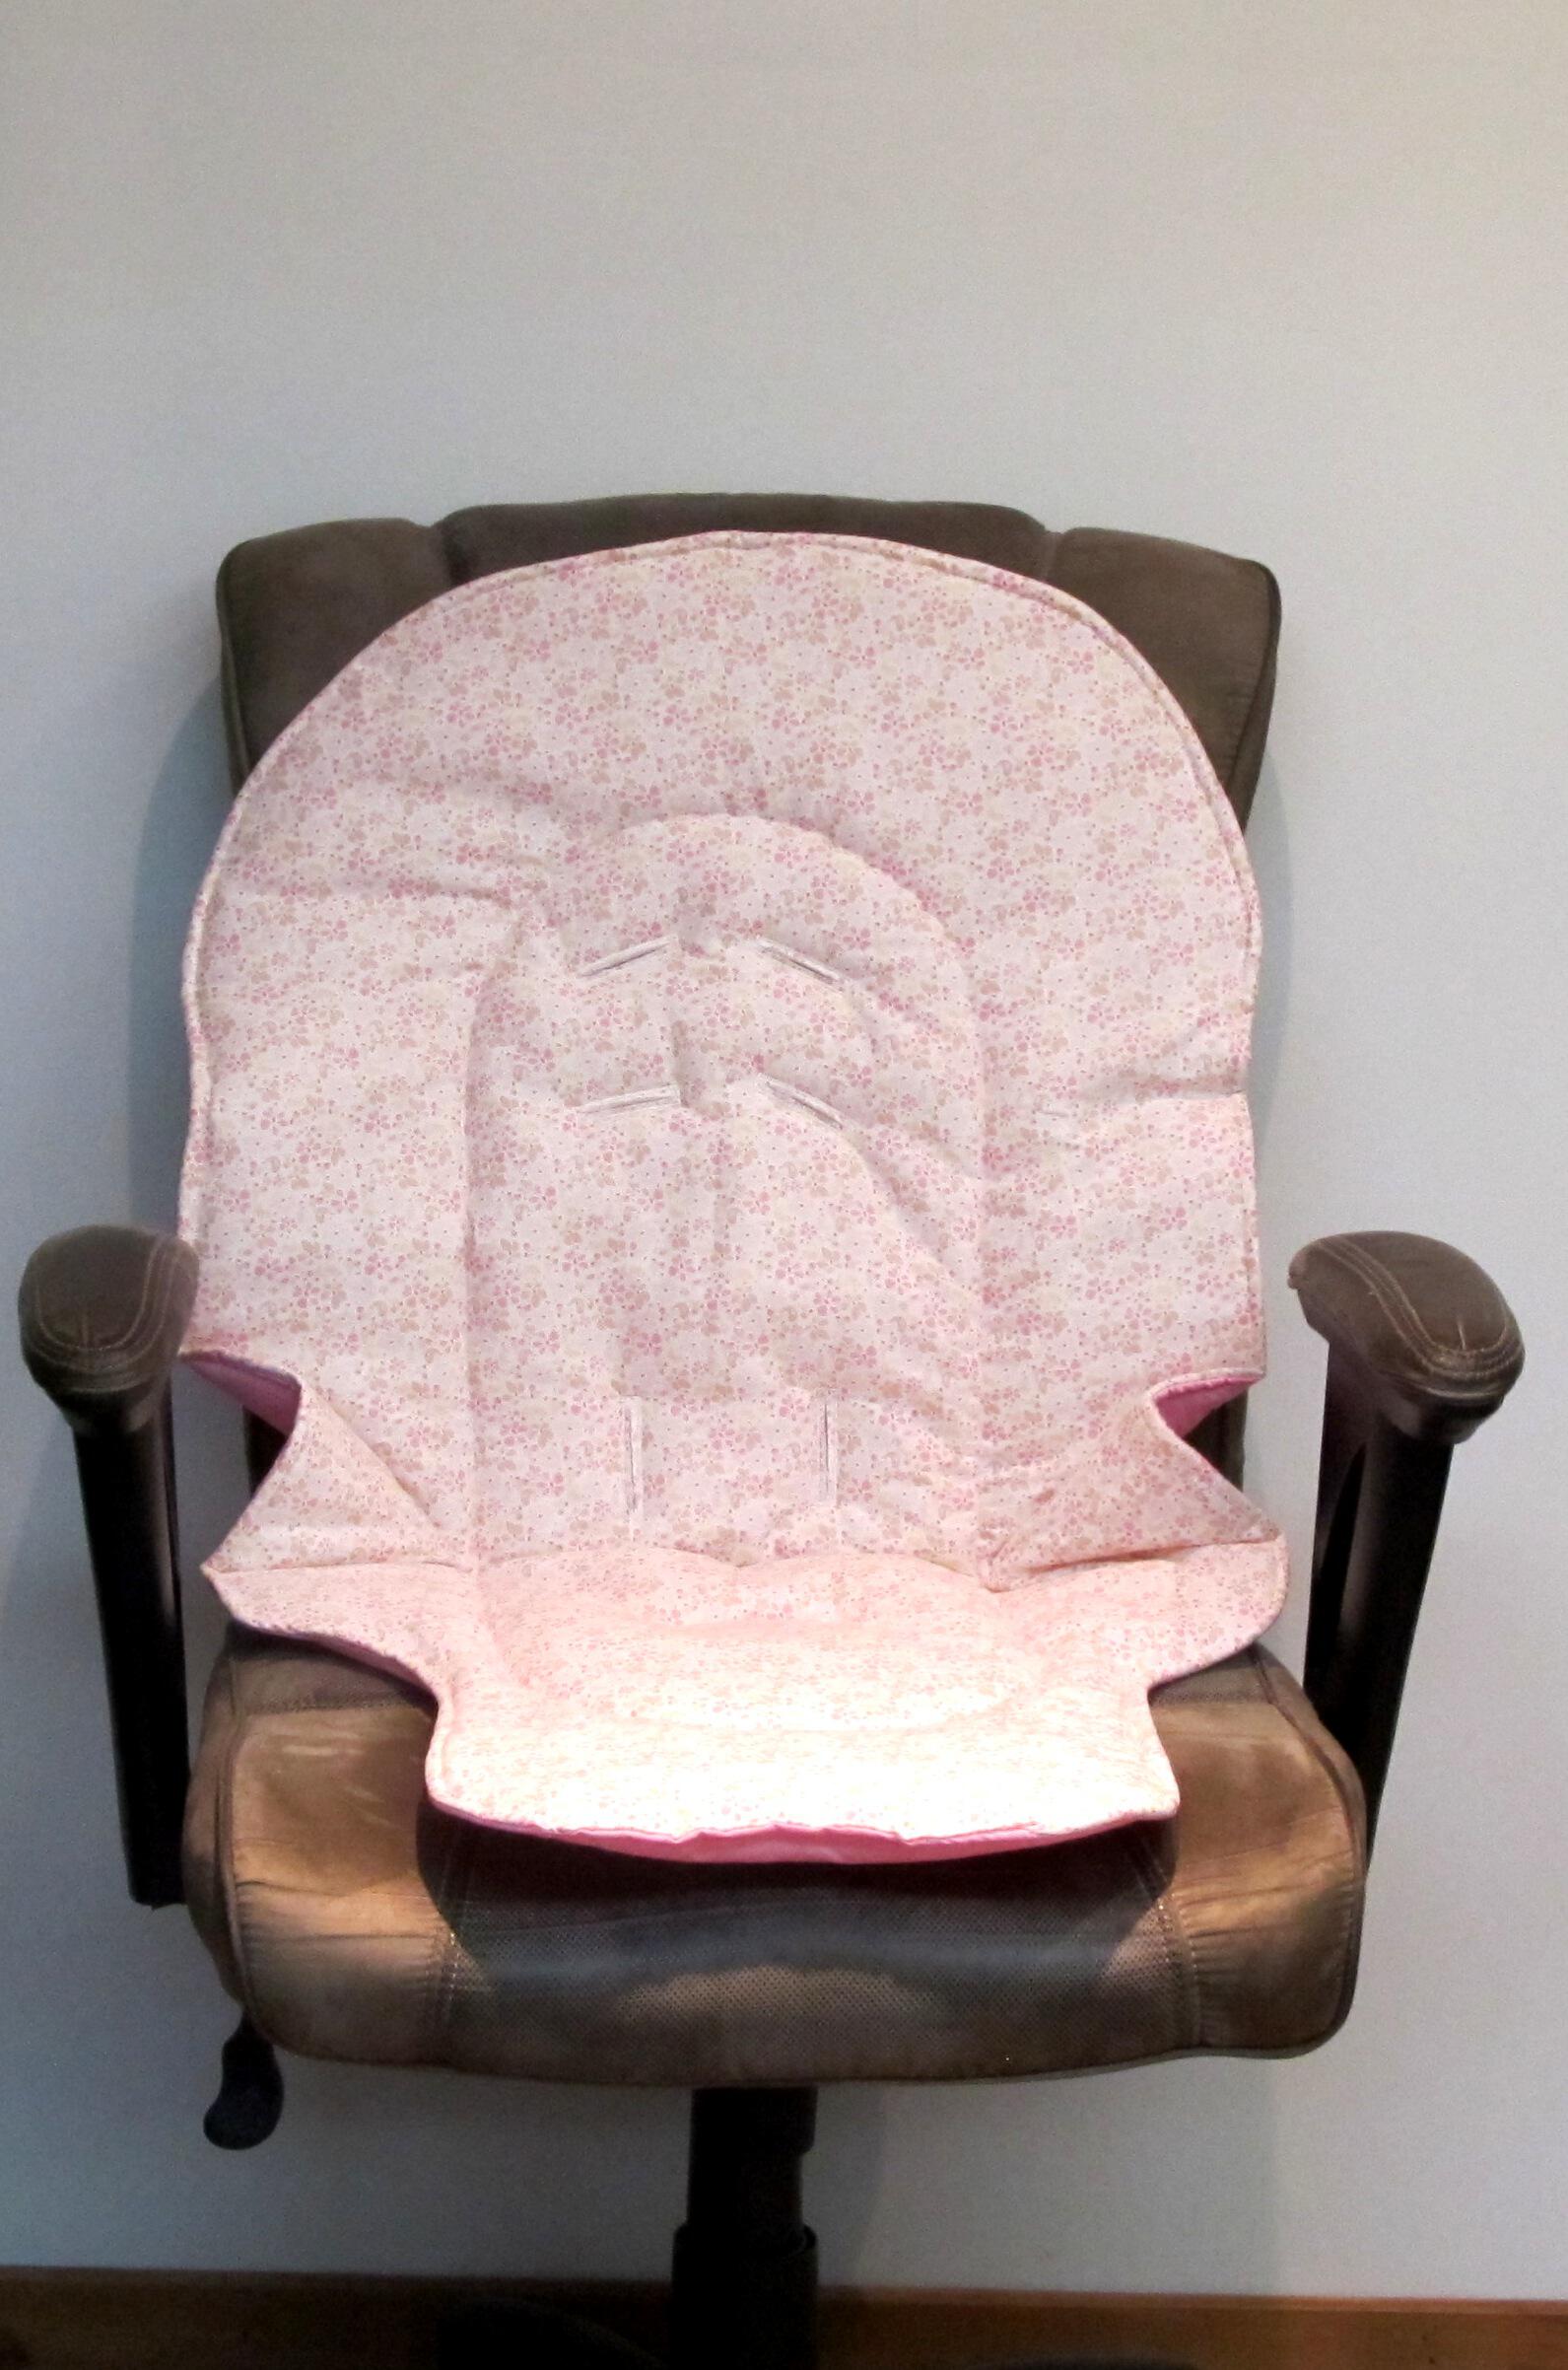 replacement pad for the older model Graco DuoDiner highchair